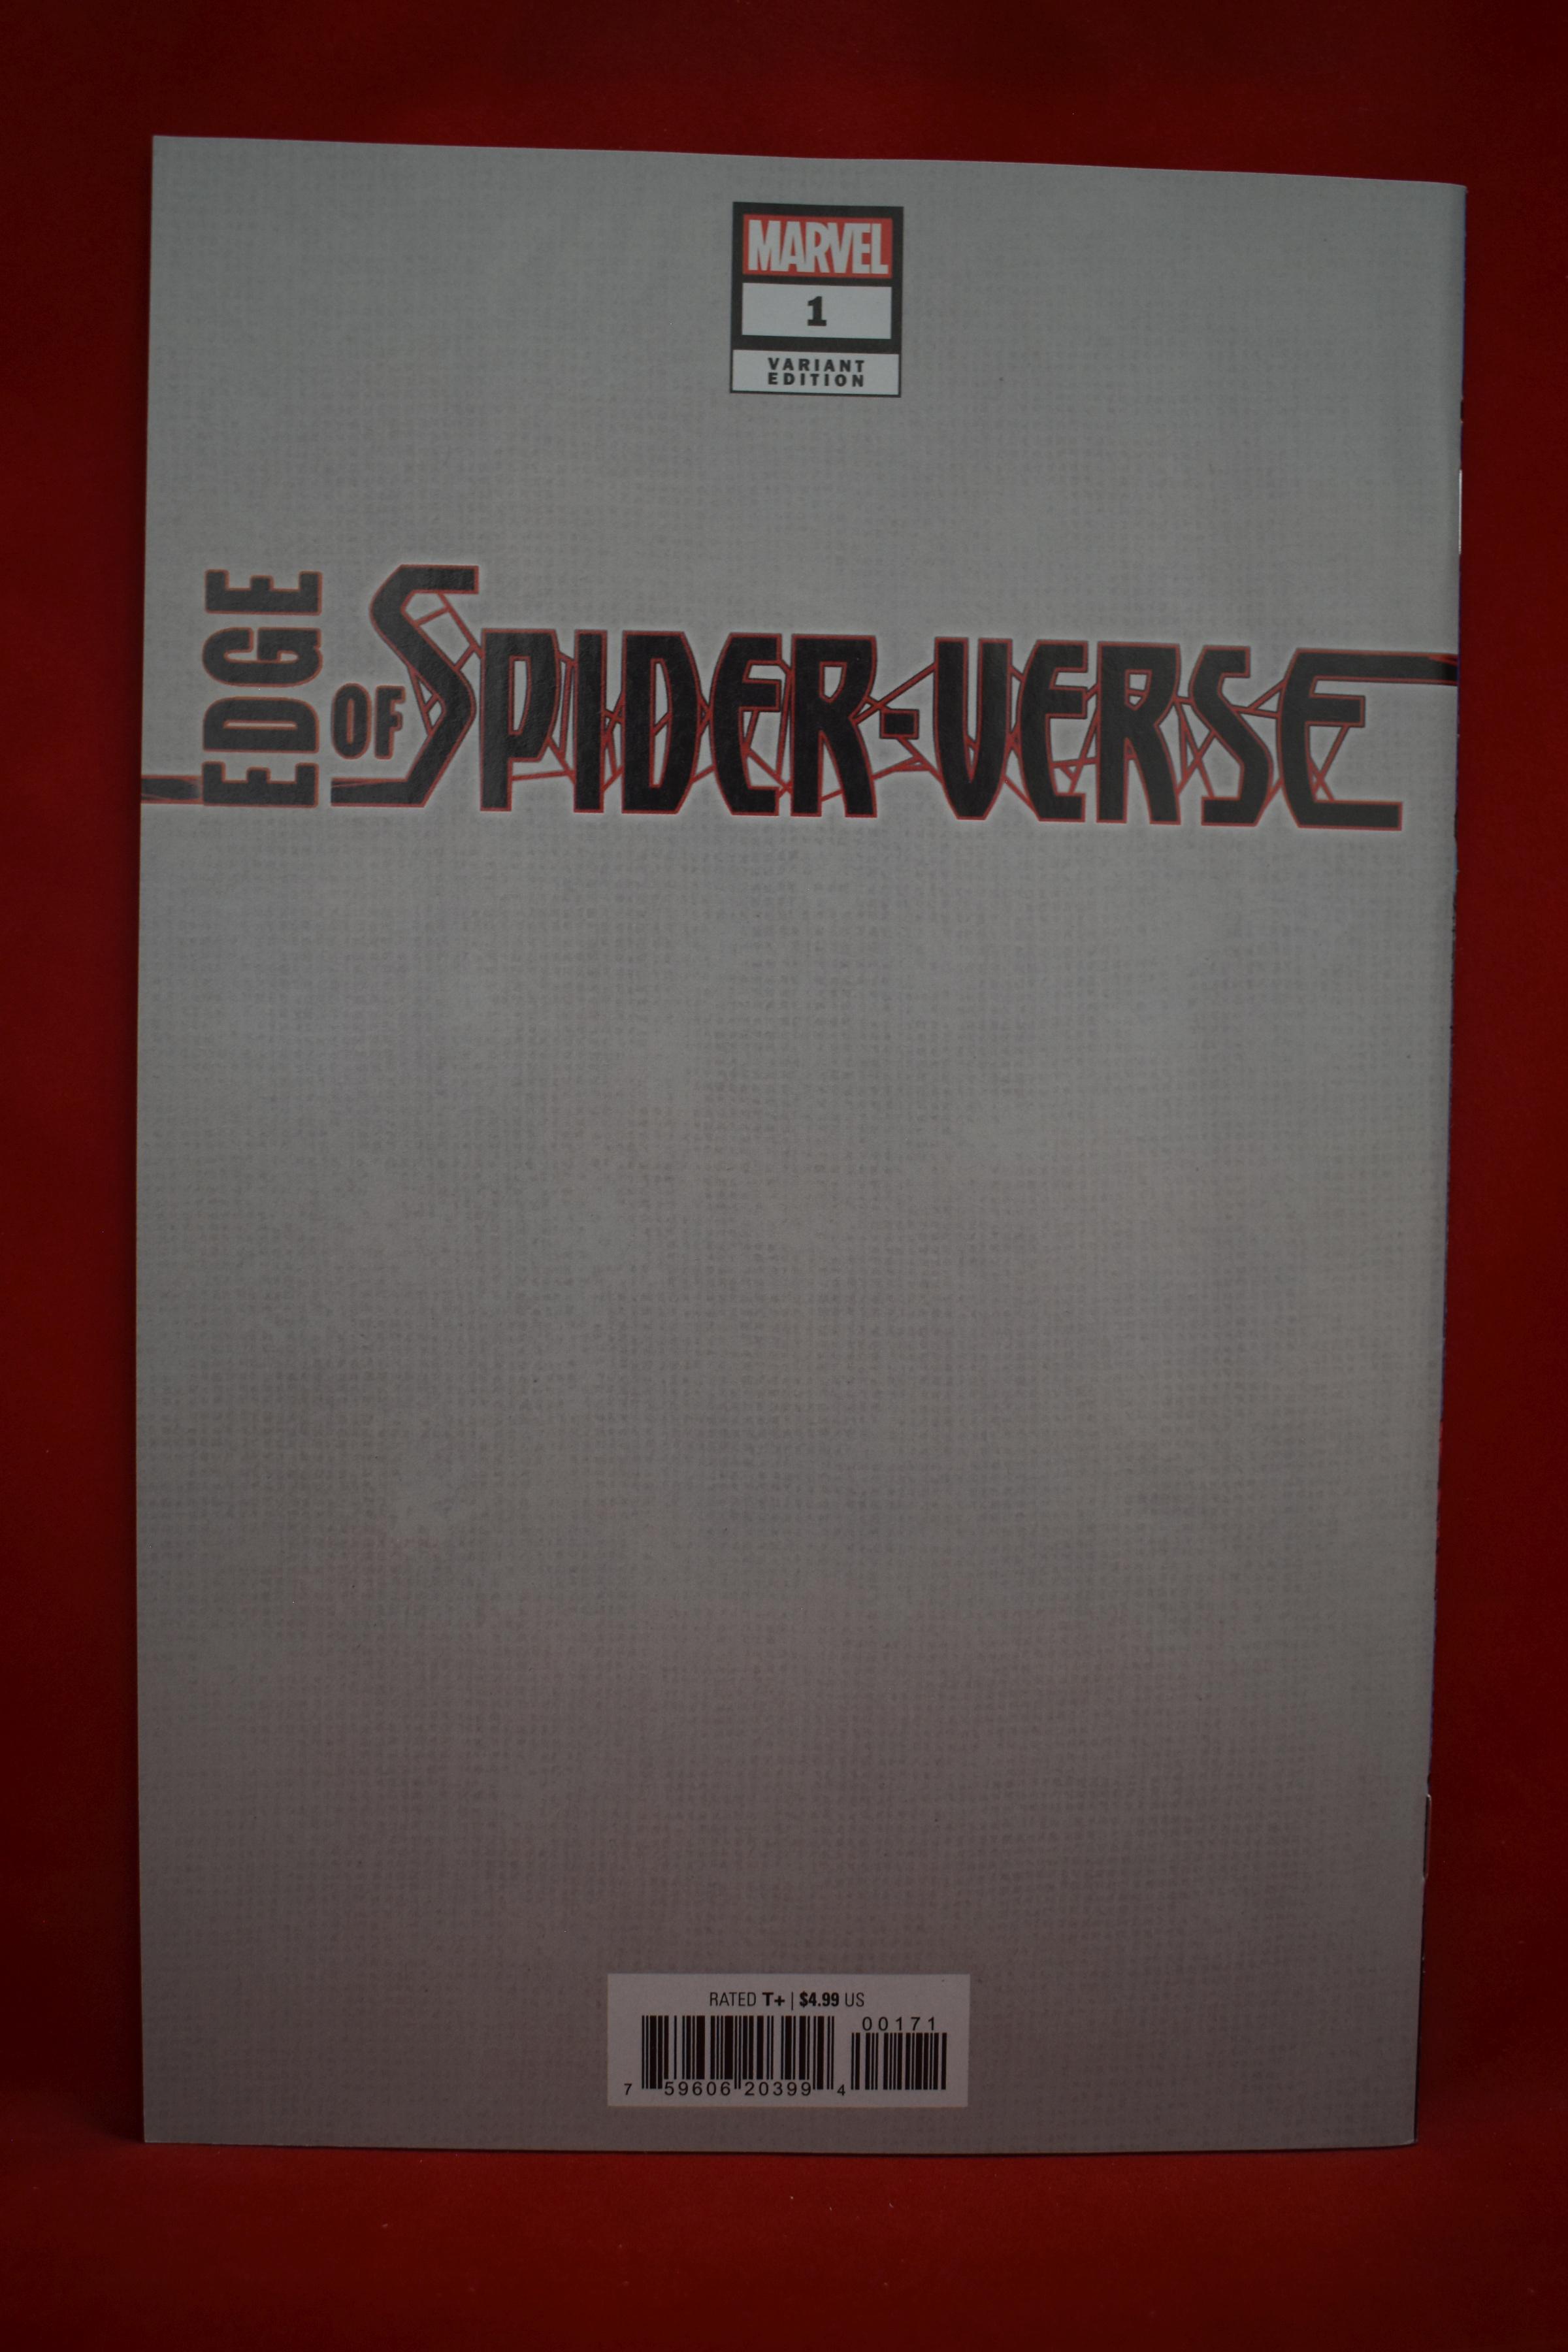 EDGE OF SPIDER-VERSE #1 | SOMETHING WICKED THIS WAY COMES! | SPIDER-REX - MARK BAGLEY